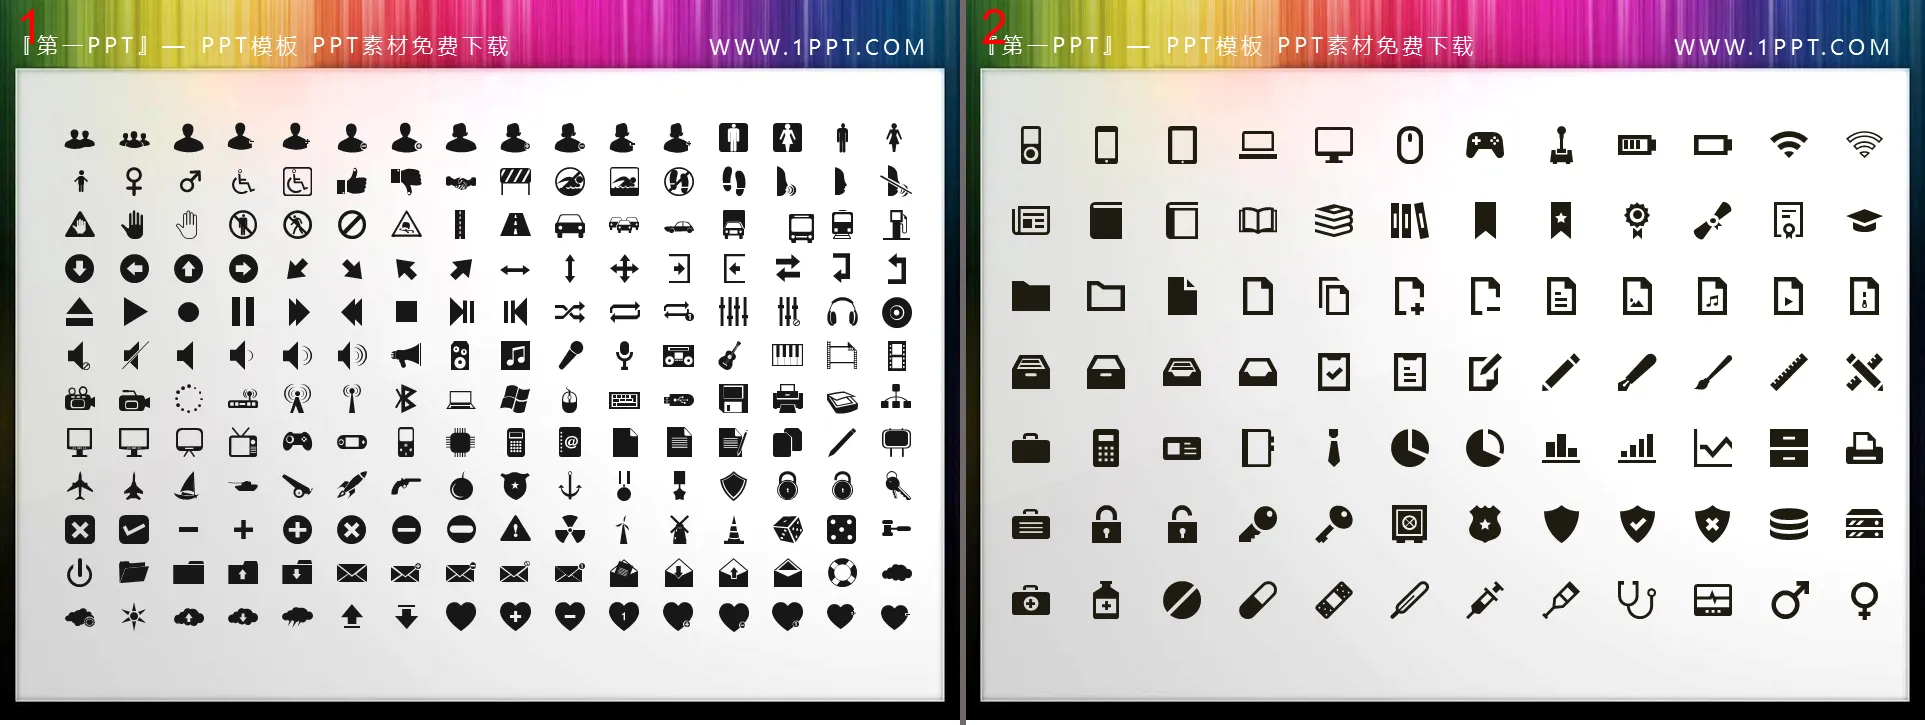 280 black flat business PPT icons